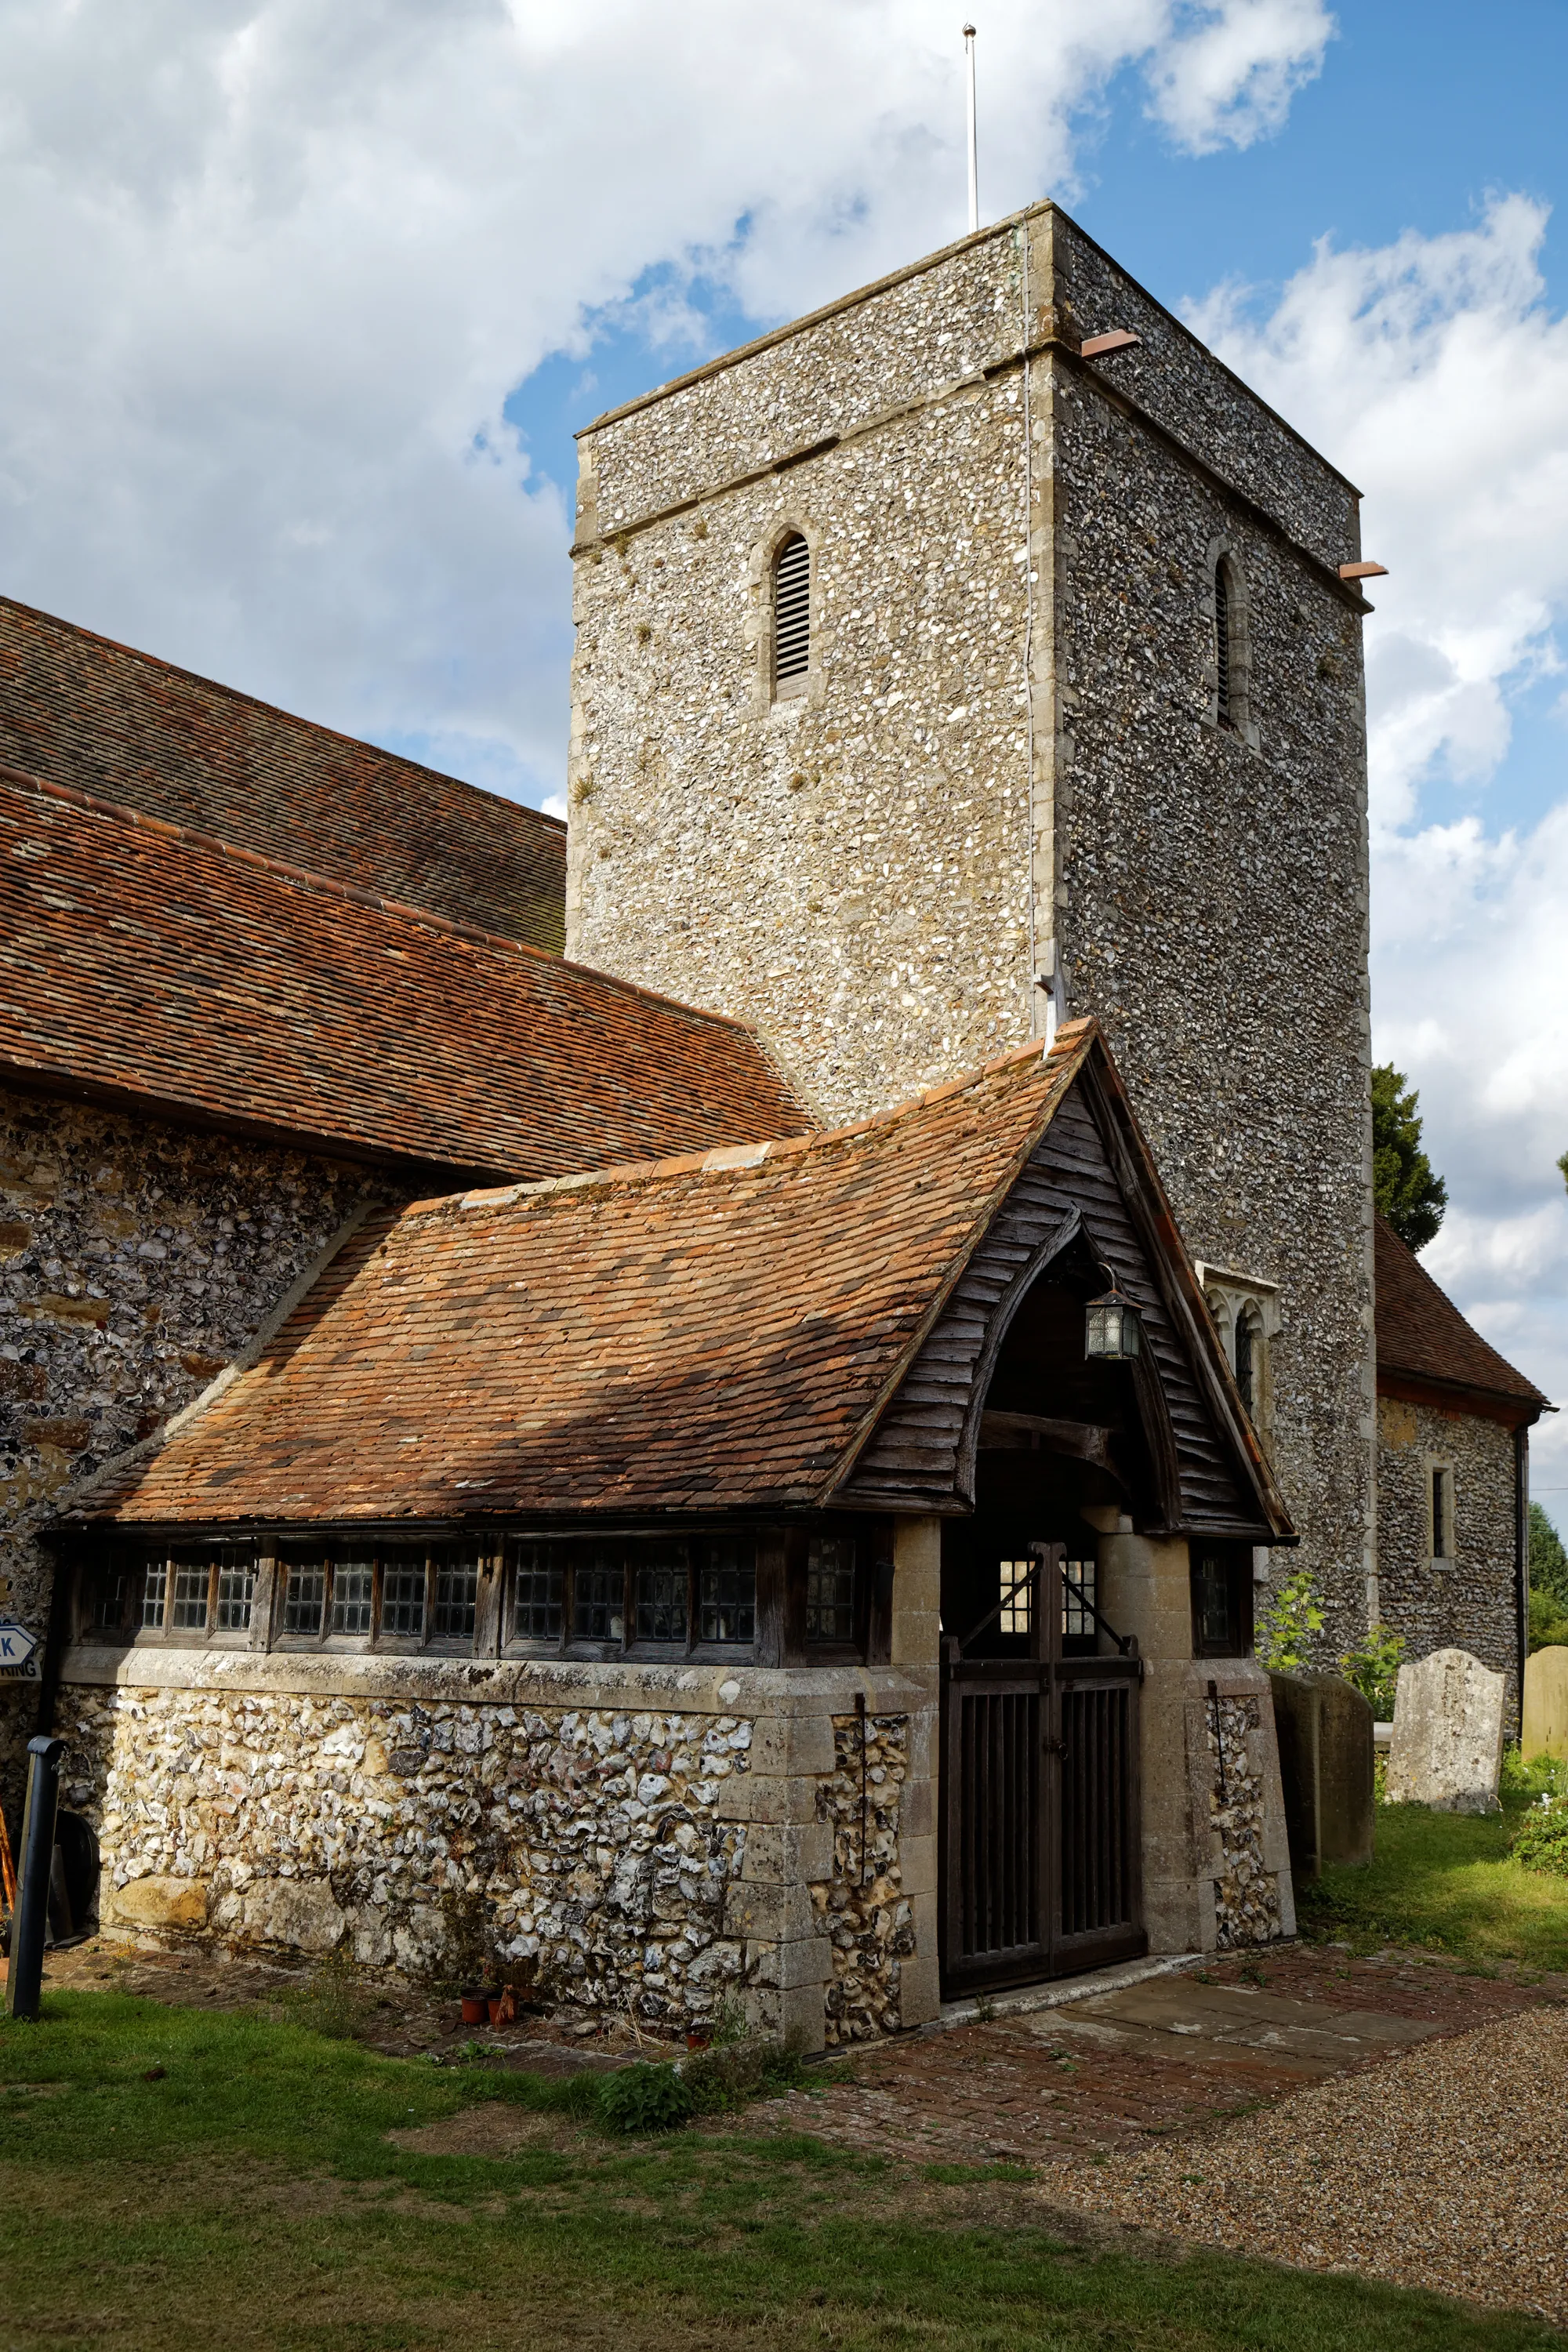 Photo showing: The south-west view of the gated porch and tower of the Church of St Peter and St Paul in Upper Hardres village in Kent, England. Camera: Canon EOS 6D with Canon EF 24-105mm F4L IS USM lens. Software: RAW file lens-corrected, optimized, perhaps cropped, and converted to JPEG with DxO OpticsPro 11 Elite, and likely further optimized with Adobe Photoshop CS2.